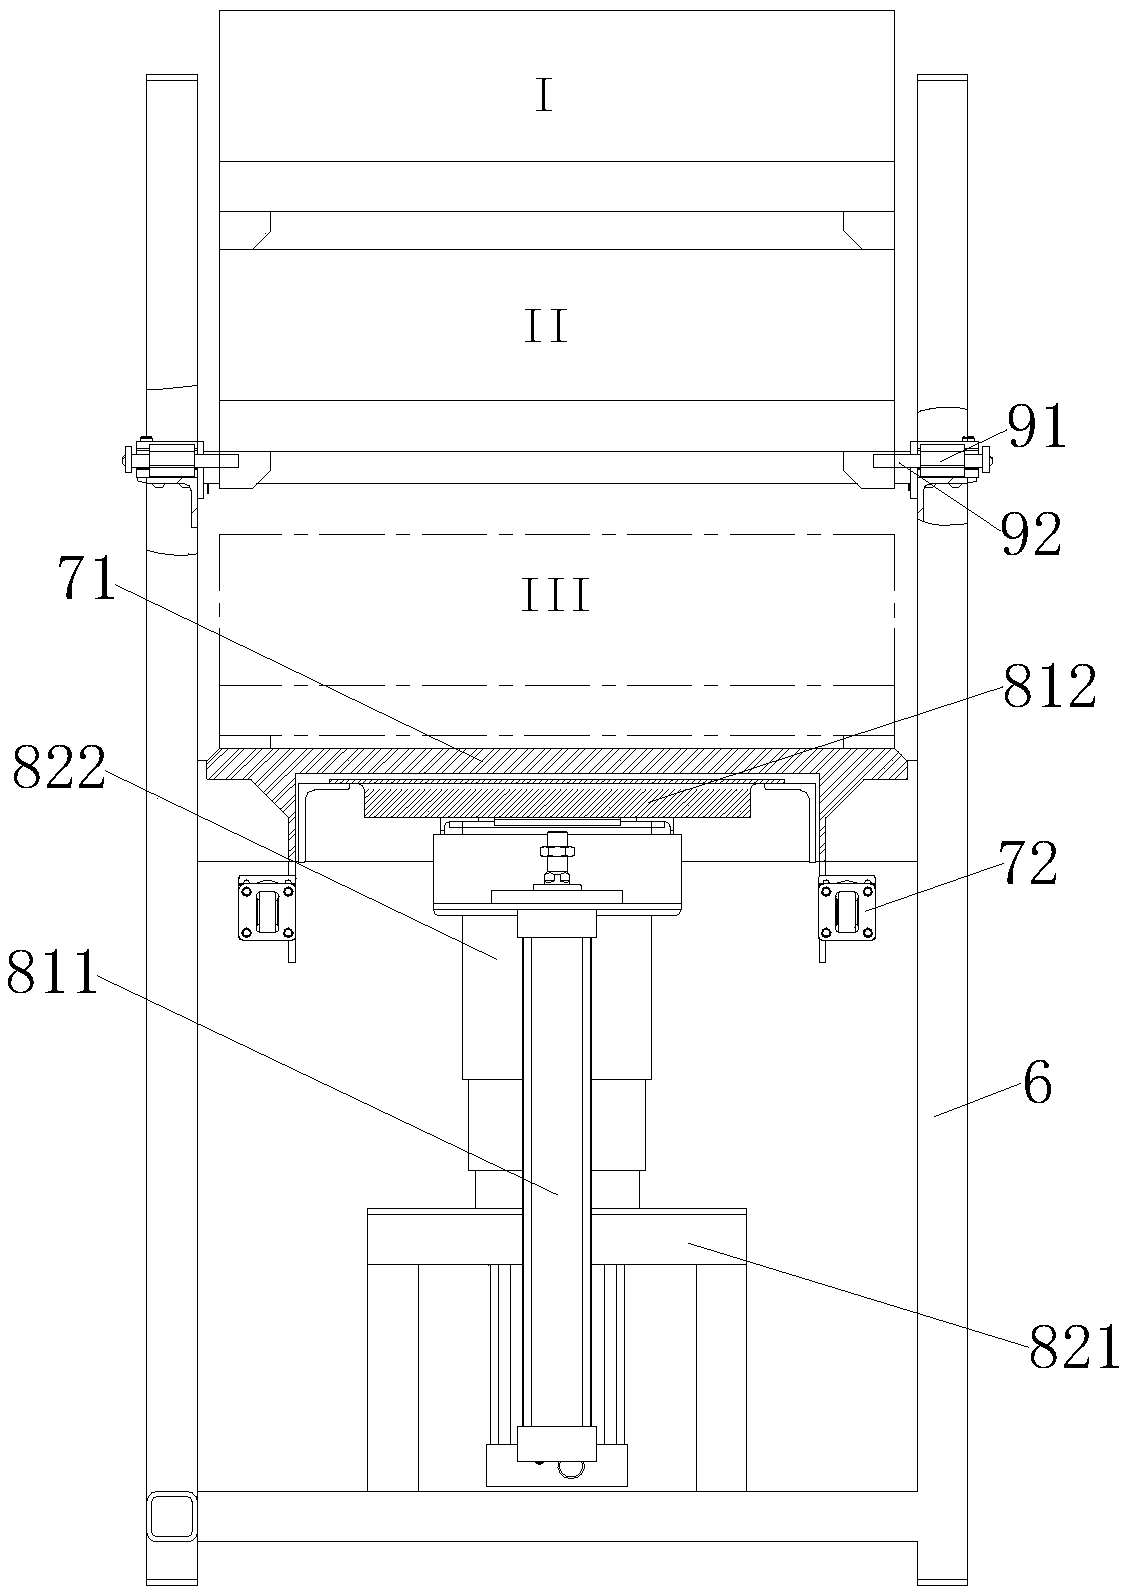 Turnover box and transfer device of turnover box